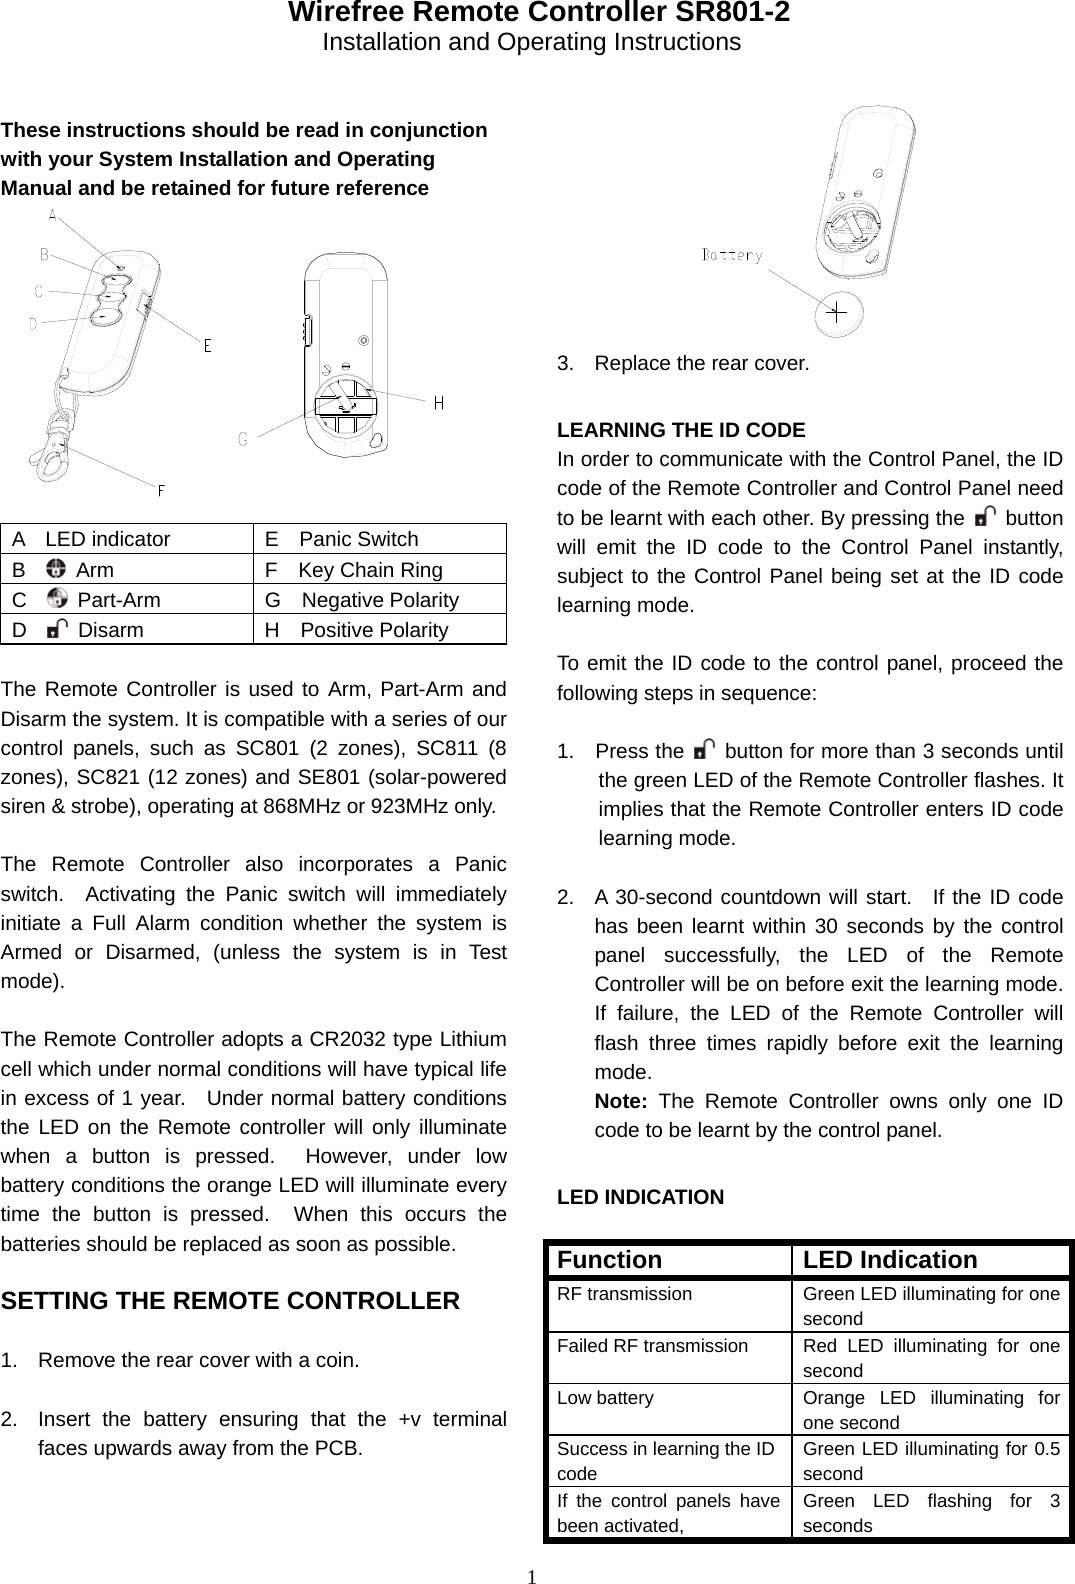 1   Wirefree Remote Controller SR801-2 Installation and Operating Instructions   These instructions should be read in conjunction with your System Installation and Operating Manual and be retained for future reference                                    A  LED indicator  E  Panic Switch B    Arm  F  Key Chain Ring C    Part-Arm  G  Negative Polarity D    Disarm  H  Positive Polarity  The Remote Controller is used to Arm, Part-Arm and Disarm the system. It is compatible with a series of our control panels, such as SC801 (2 zones), SC811 (8 zones), SC821 (12 zones) and SE801 (solar-powered siren &amp; strobe), operating at 868MHz or 923MHz only.  The Remote Controller also incorporates a Panic switch.  Activating the Panic switch will immediately initiate a Full Alarm condition whether the system is Armed or Disarmed, (unless the system is in Test mode).  The Remote Controller adopts a CR2032 type Lithium cell which under normal conditions will have typical life in excess of 1 year.   Under normal battery conditions the LED on the Remote controller will only illuminate when a button is pressed.  However, under low battery conditions the orange LED will illuminate every time the button is pressed.  When this occurs the batteries should be replaced as soon as possible.  SETTING THE REMOTE CONTROLLER  1.  Remove the rear cover with a coin.  2.  Insert the battery ensuring that the +v terminal faces upwards away from the PCB.              3.  Replace the rear cover.                                  LEARNING THE ID CODE In order to communicate with the Control Panel, the ID code of the Remote Controller and Control Panel need to be learnt with each other. By pressing the   button will emit the ID code to the Control Panel instantly, subject to the Control Panel being set at the ID code learning mode.  To emit the ID code to the control panel, proceed the following steps in sequence:  1.  Press the    button for more than 3 seconds until the green LED of the Remote Controller flashes. It implies that the Remote Controller enters ID code learning mode.  2.  A 30-second countdown will start.  If the ID code has been learnt within 30 seconds by the control panel successfully, the LED of the Remote Controller will be on before exit the learning mode. If failure, the LED of the Remote Controller will flash three times rapidly before exit the learning mode. Note:  The Remote Controller owns only one ID code to be learnt by the control panel.  LED INDICATION  Function LED Indication RF transmission  Green LED illuminating for one second Failed RF transmission  Red LED illuminating for one second Low battery  Orange LED illuminating for one second Success in learning the ID code Green LED illuminating for 0.5 second If the control panels have been activated,   Green LED flashing for 3 seconds 